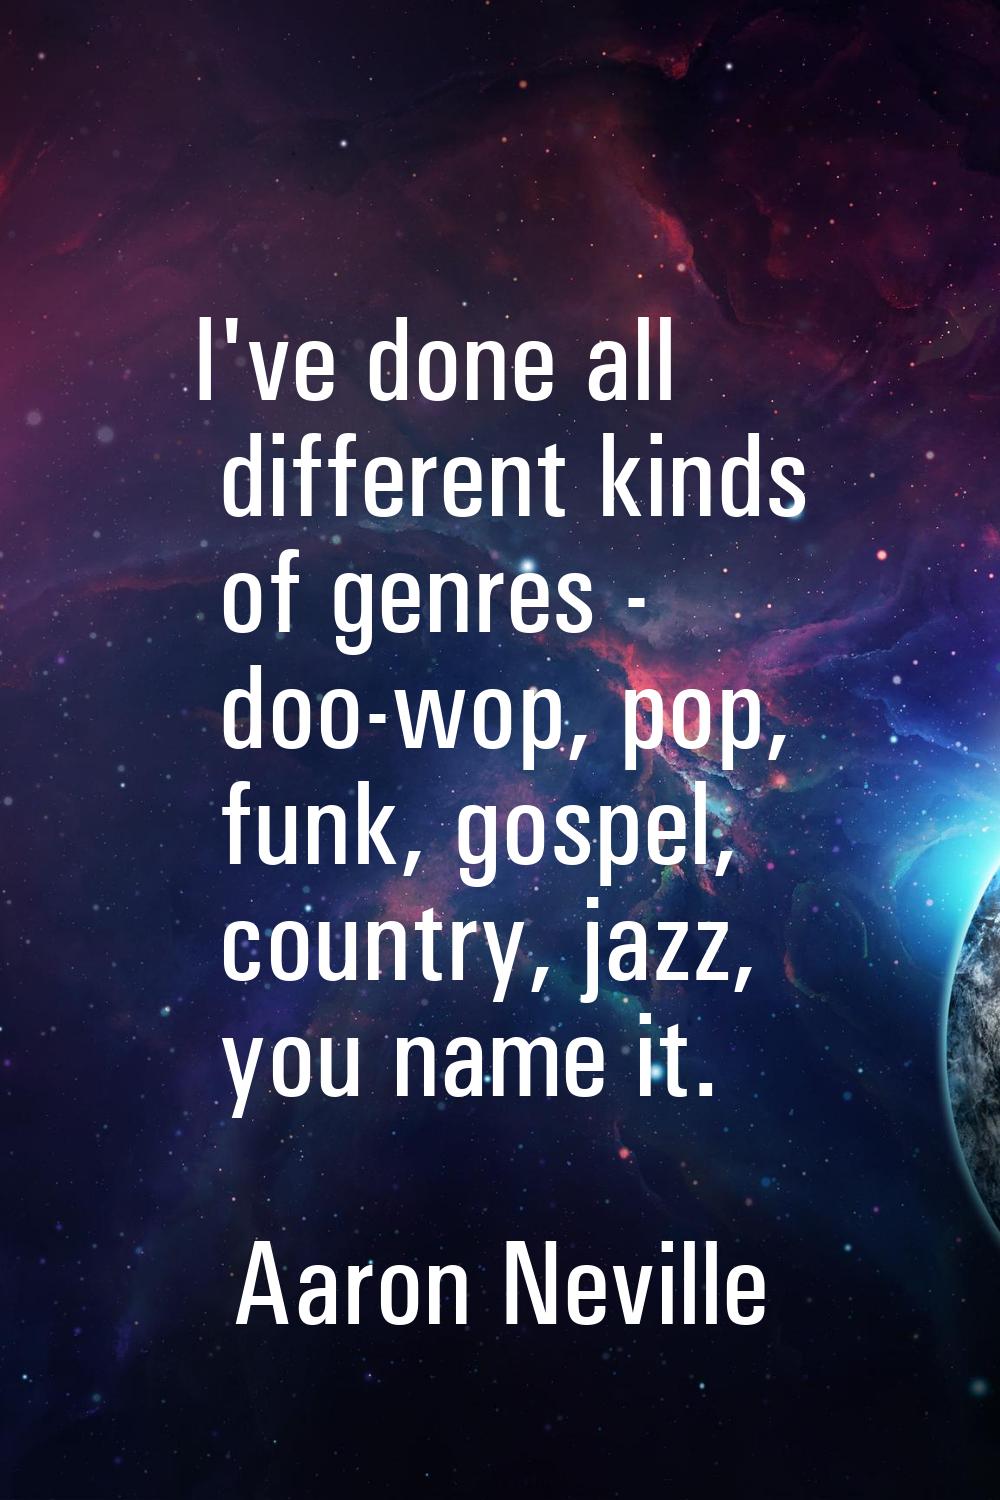 I've done all different kinds of genres - doo-wop, pop, funk, gospel, country, jazz, you name it.